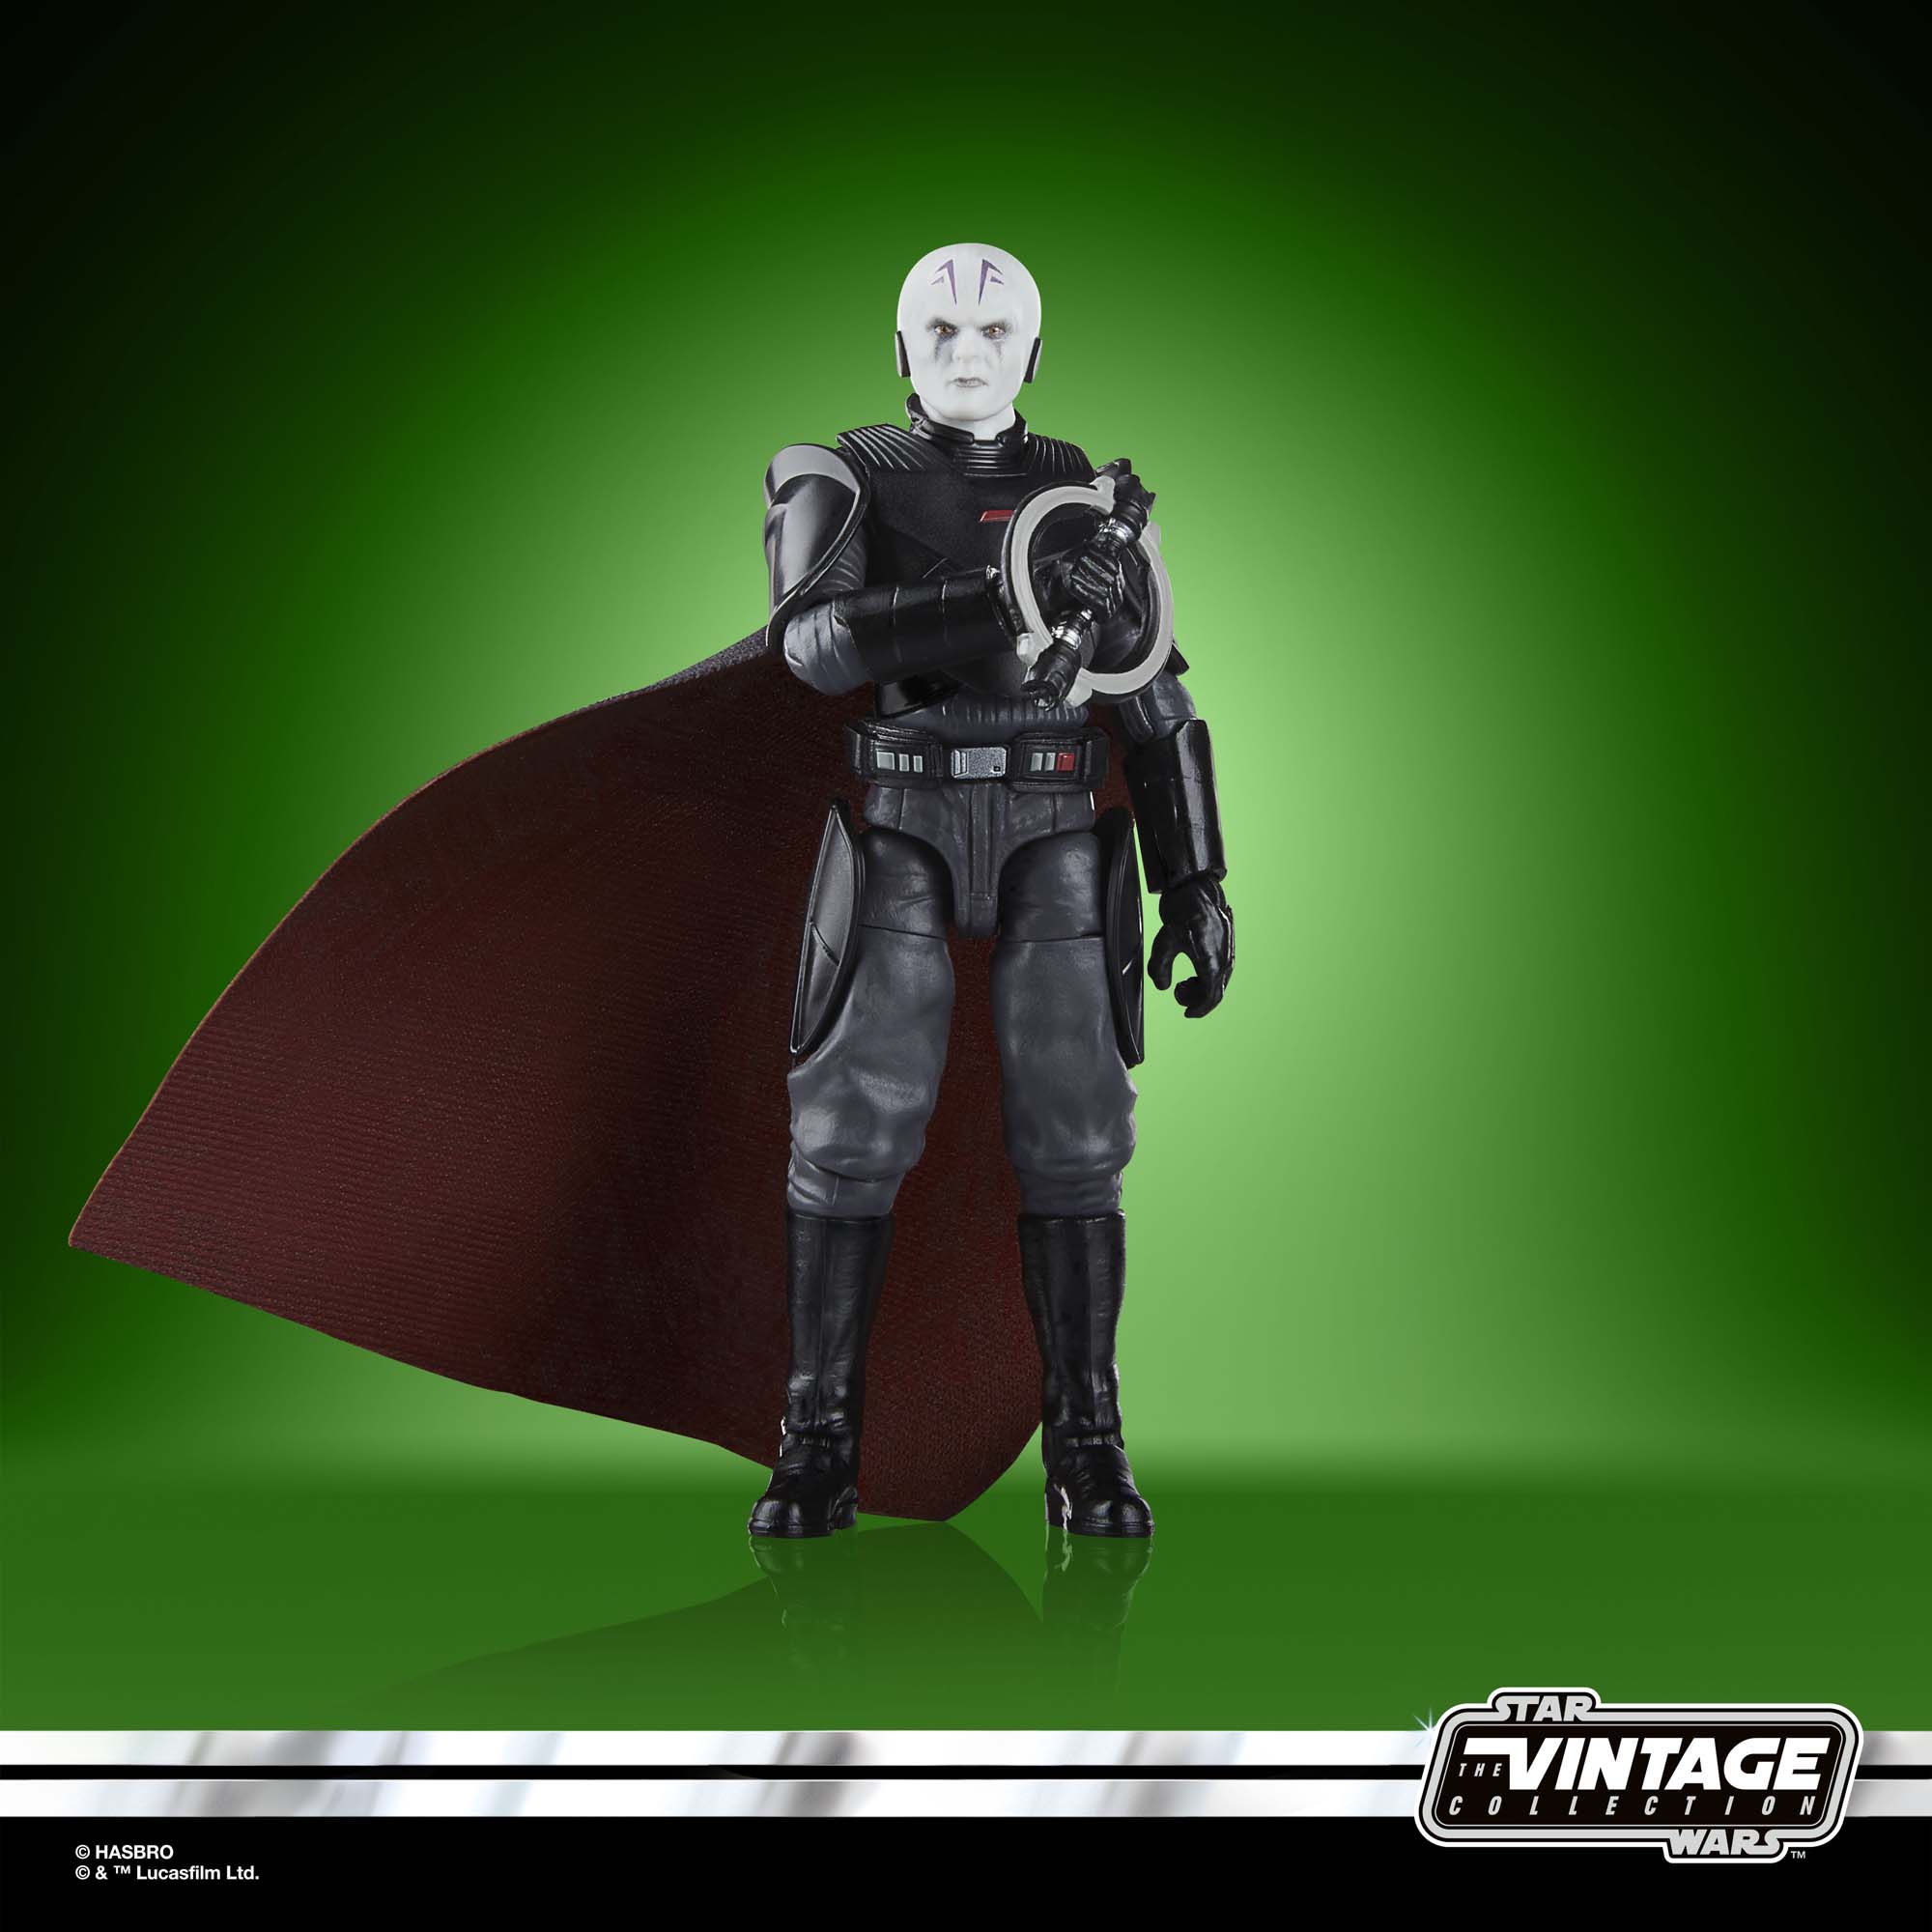 Star Wars The Vintage Collection Grand Inquisitor Action-Figur (9,5 cm) F73435X0 5010996184238